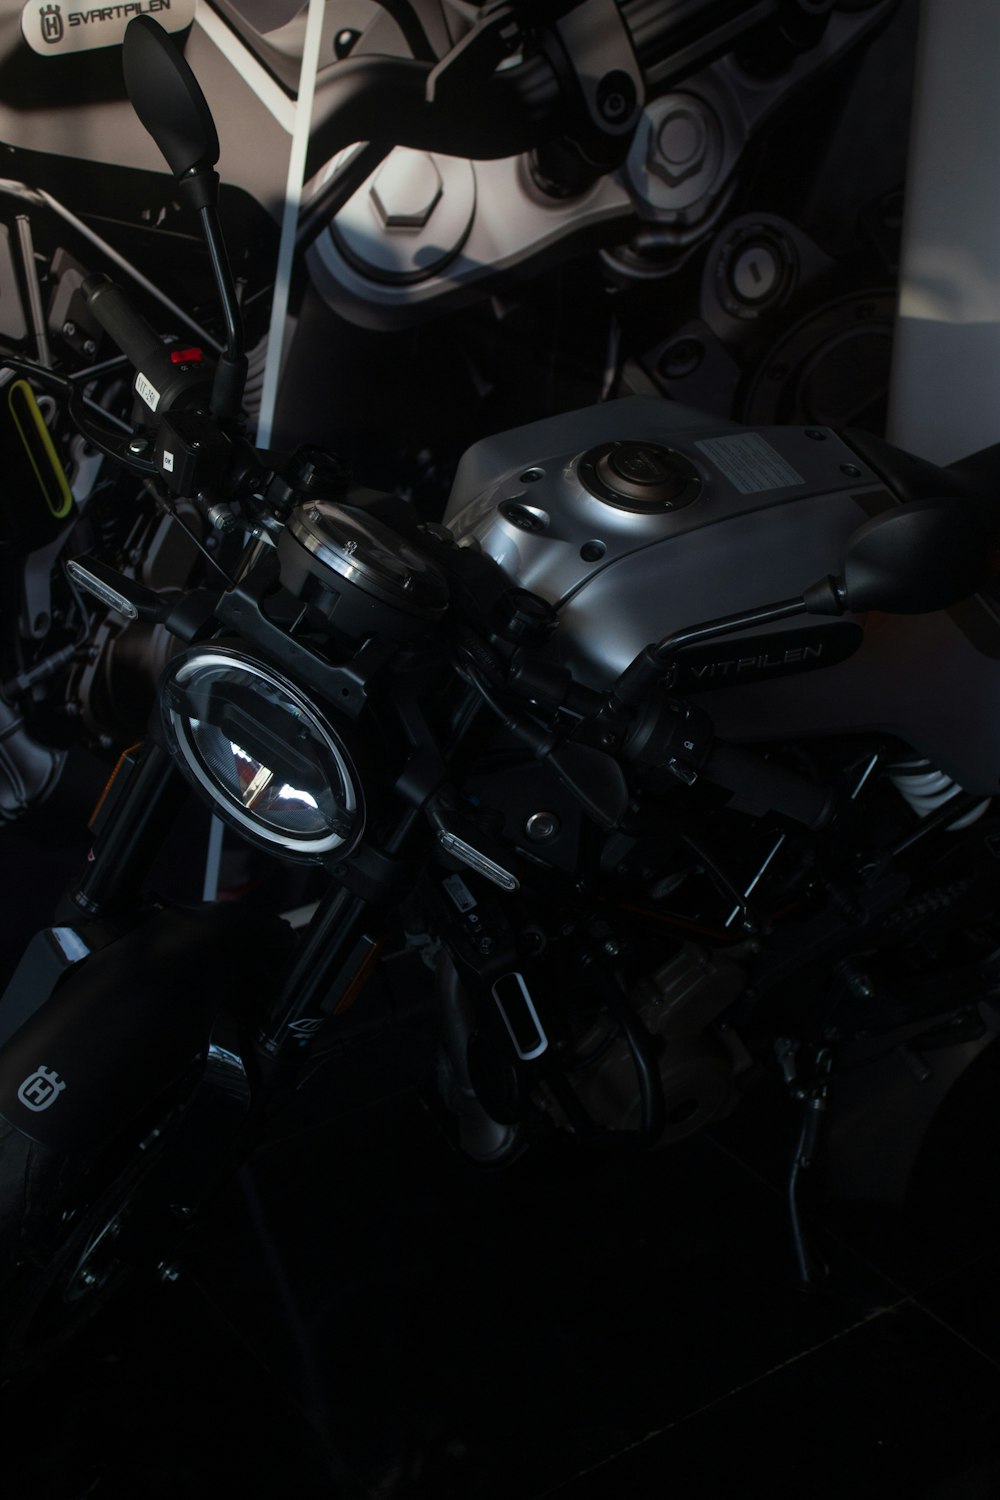 a motorcycle is parked in a dark room